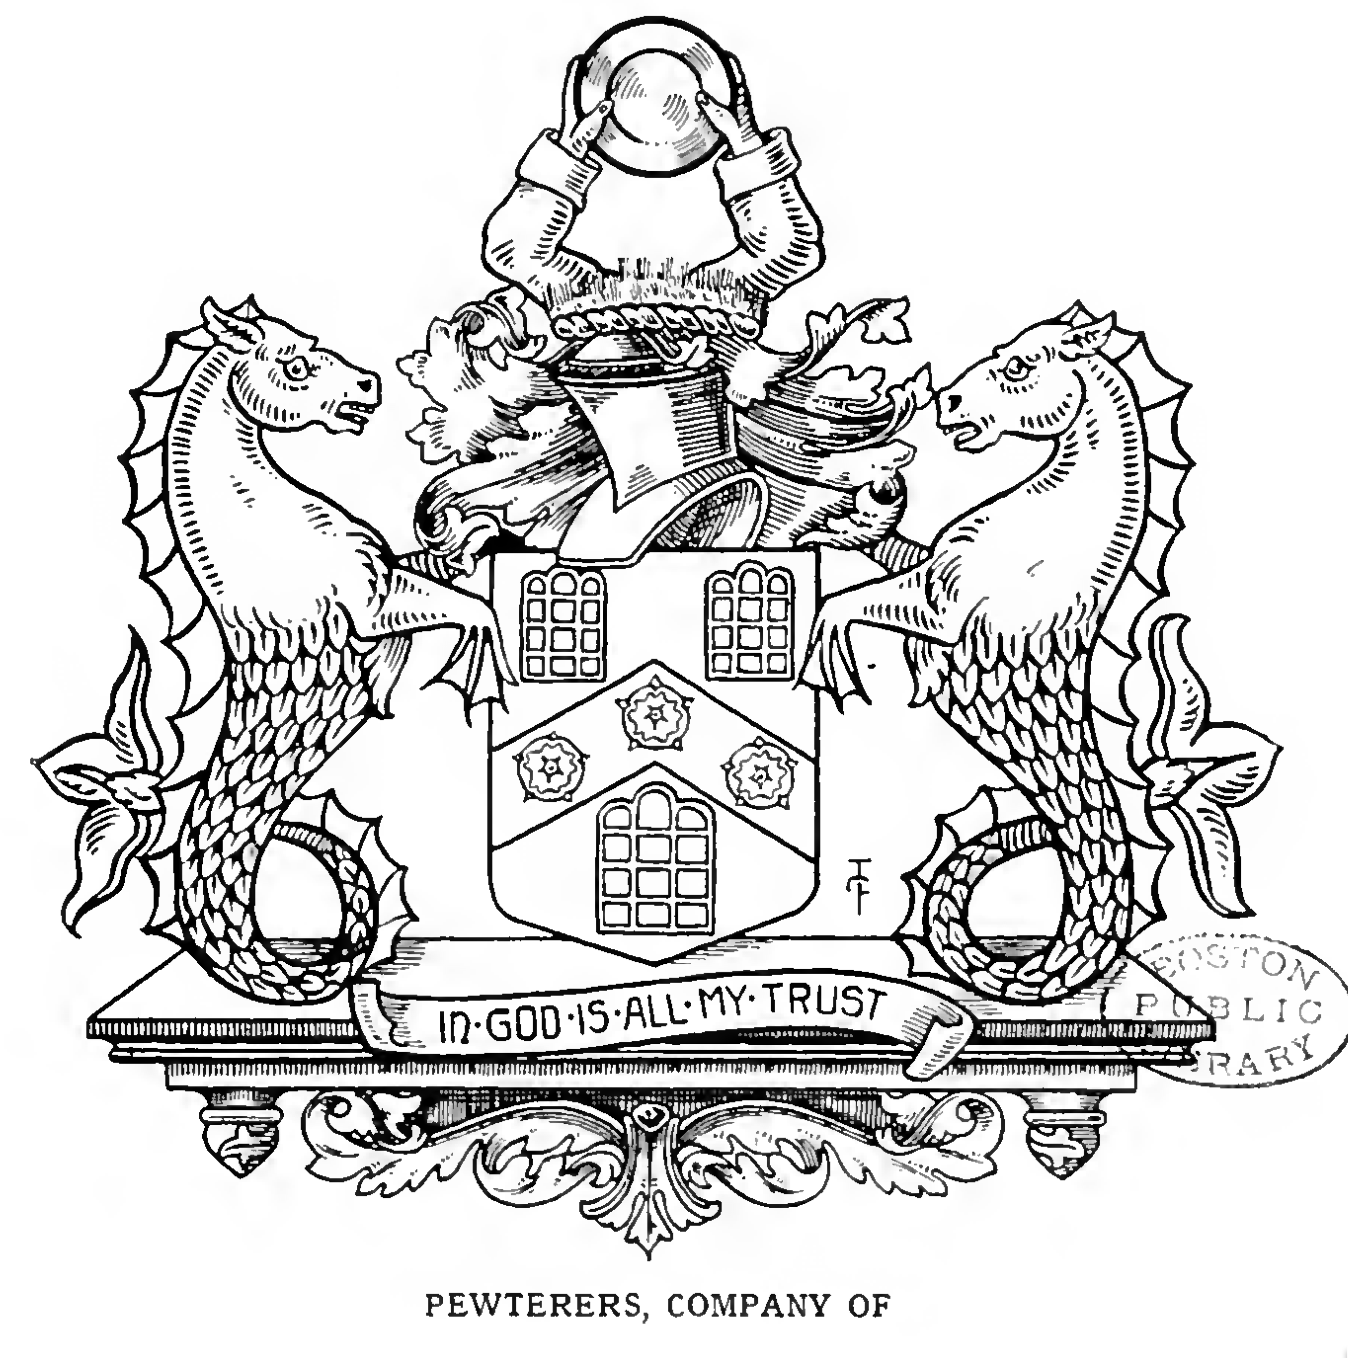 PEWTERERS, The Worshipful Company of, London.